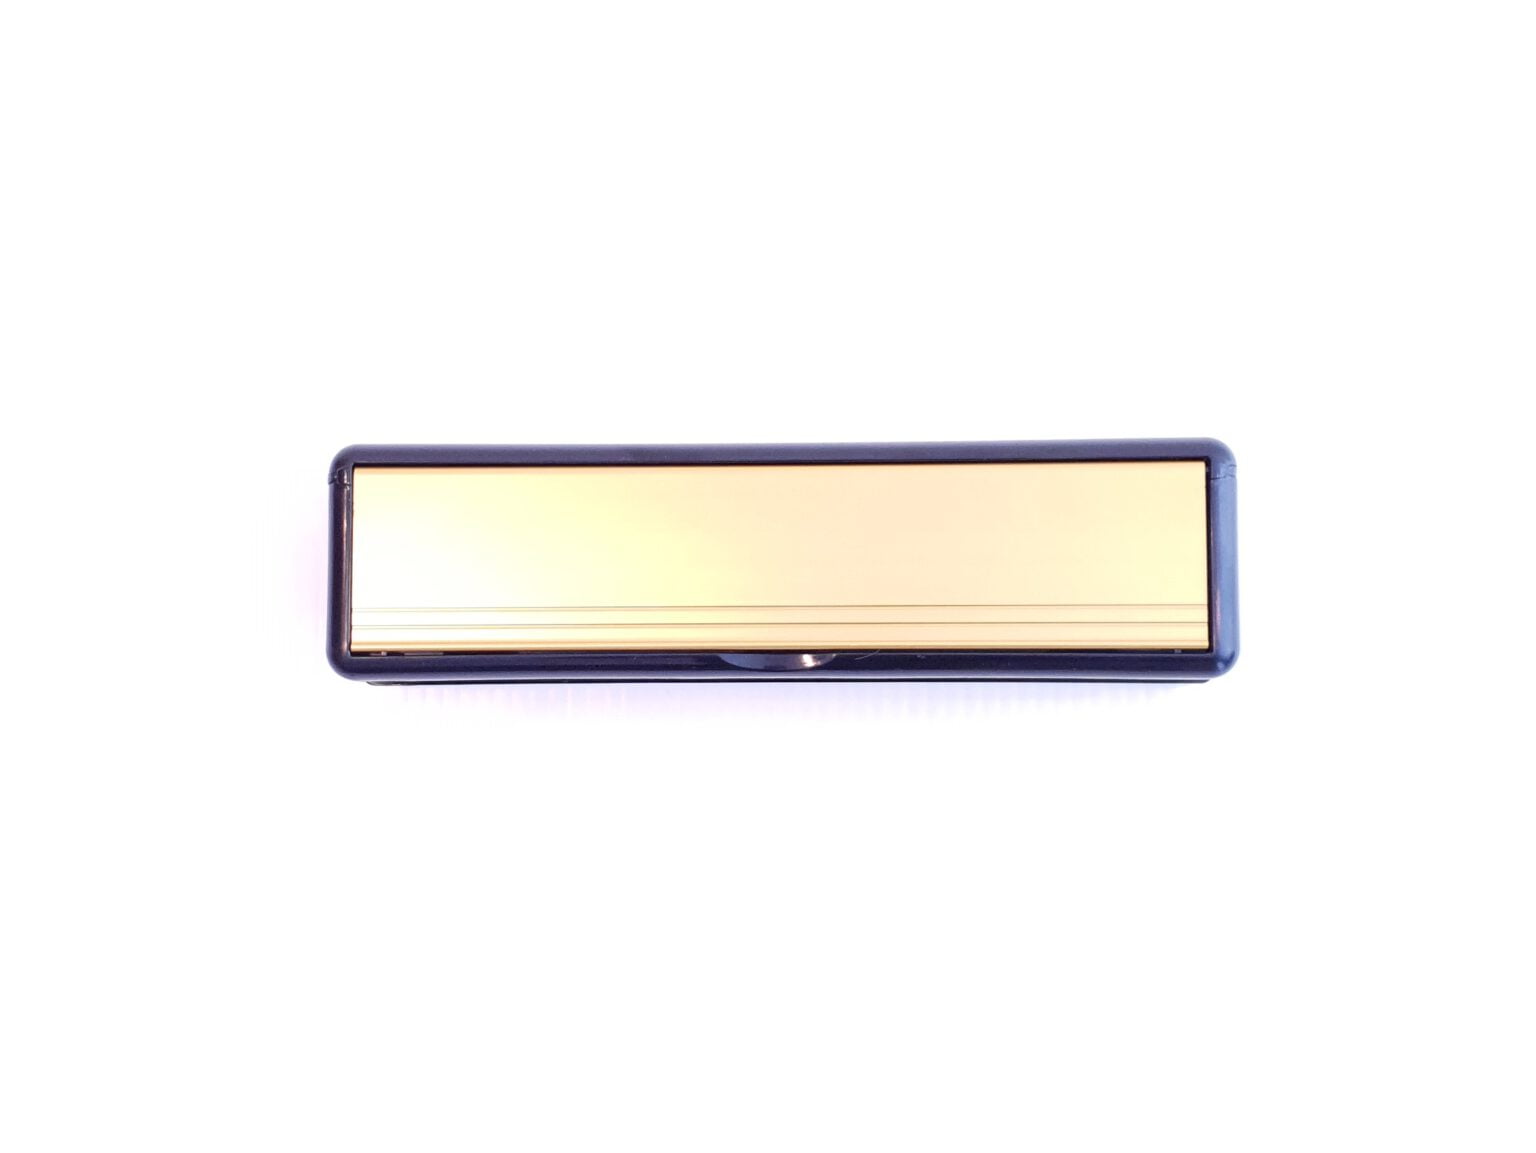 10 Inch Letterplate / Letterbox For uPVC Double Glazing & Wooden Doors